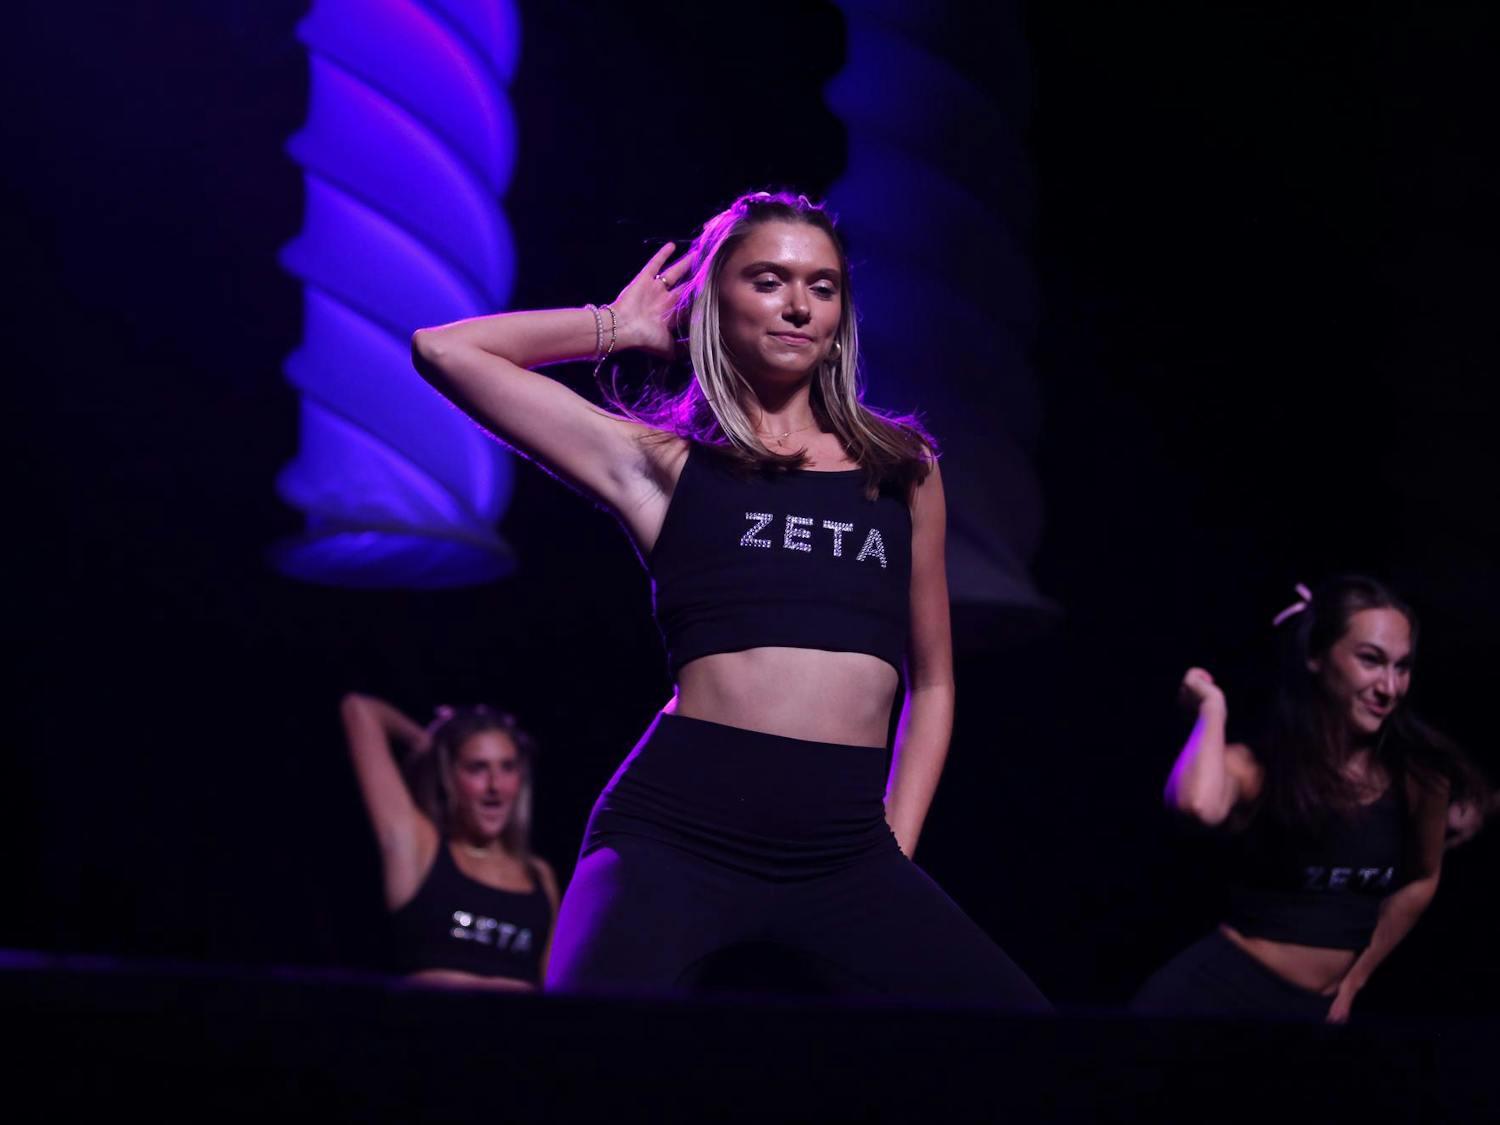 A sister of Zeta Tau Alpha performs on stage at the Columbia Metropolitan Convention Center. She participated in Spurs and Struts, an annual dance competition held by USC Homecoming as a part of Homecoming week events.